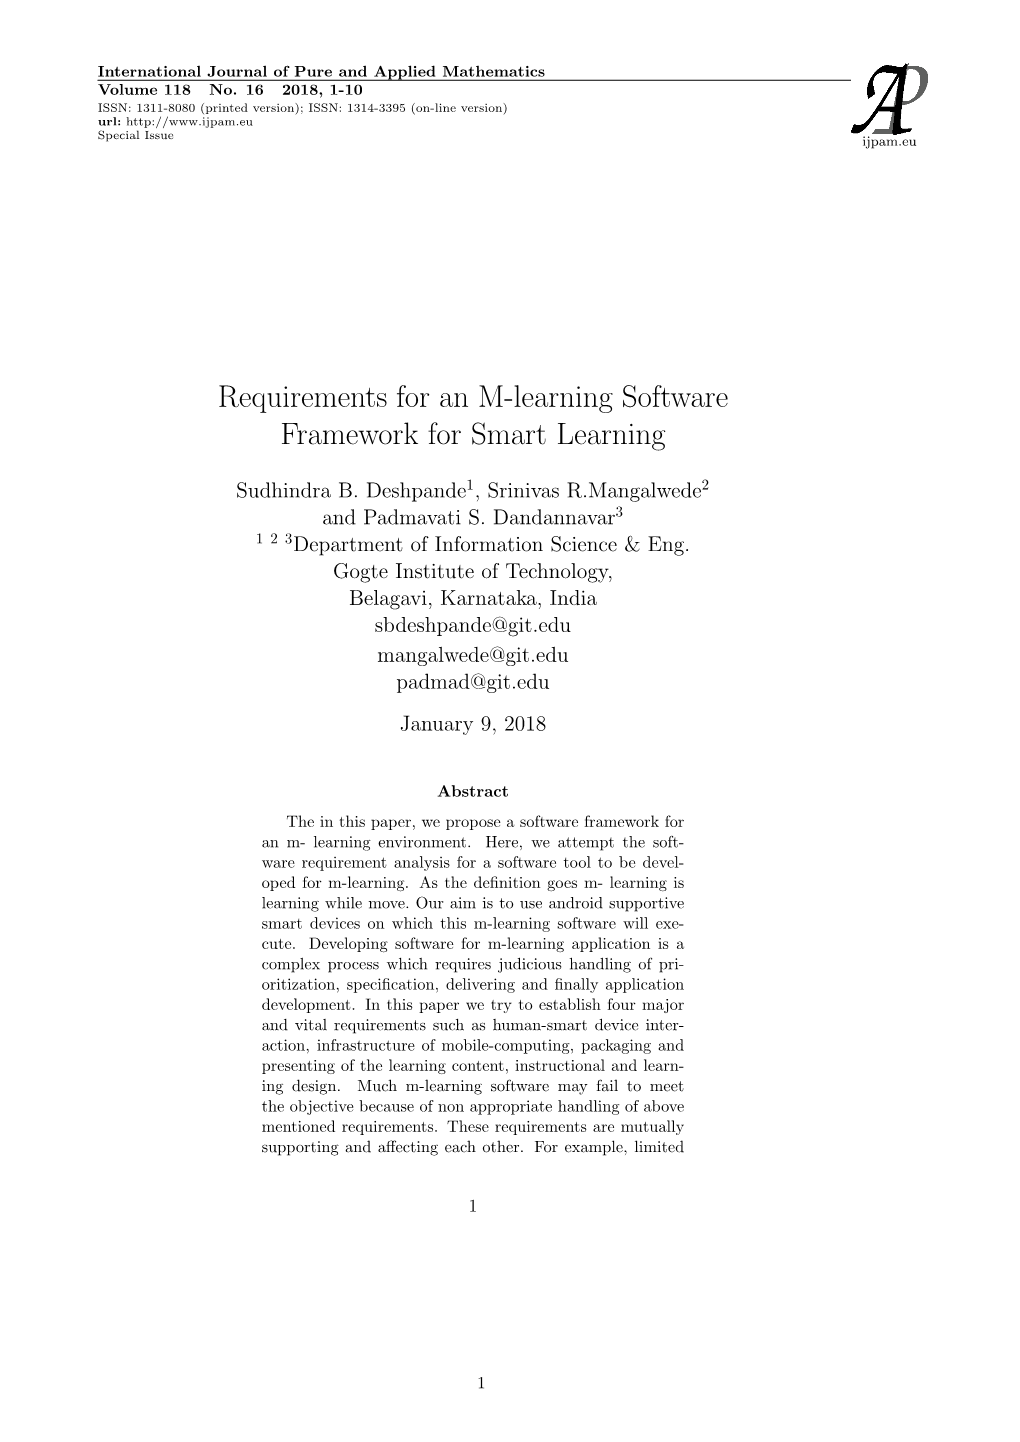 Requirements for an M-Learning Software Framework for Smart Learning